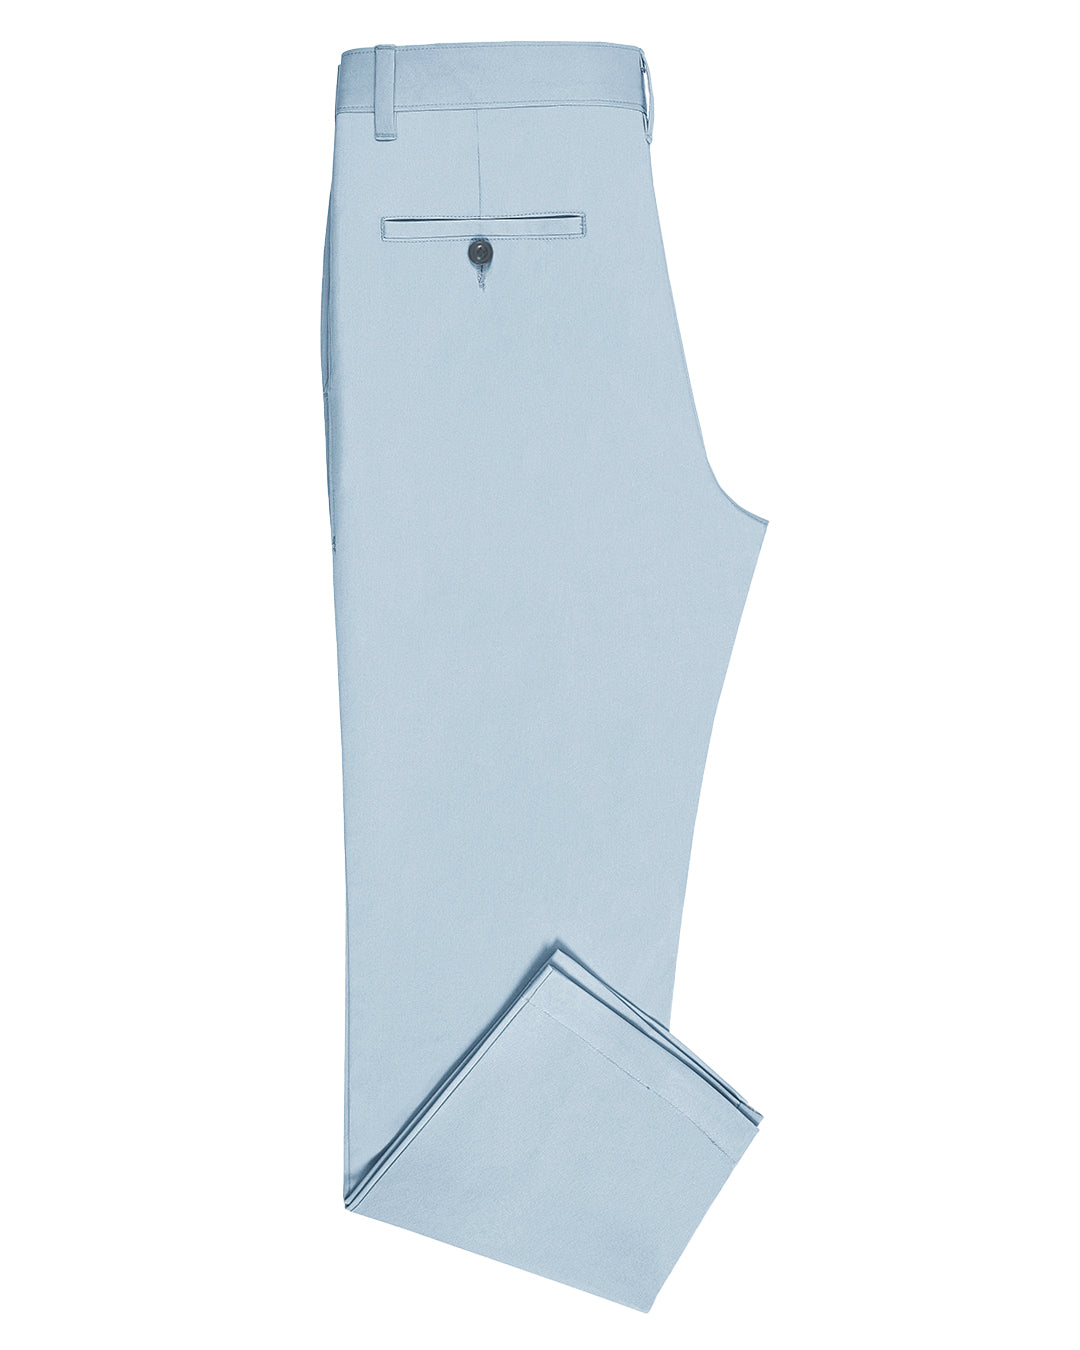 Side view of custom Genoa Chino pants for men by Luxire in powder blue